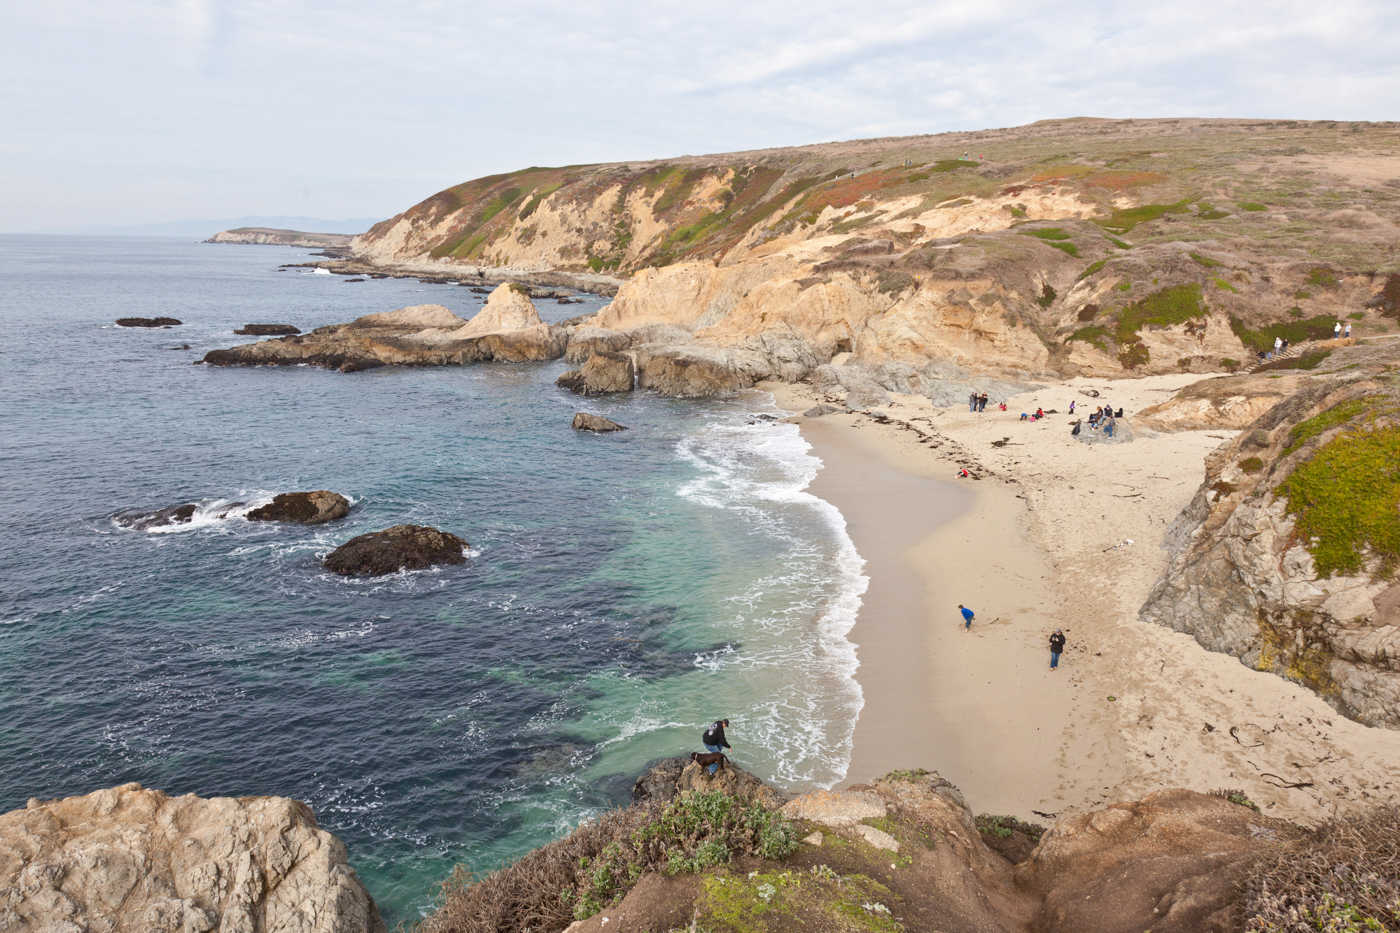 11 AMAZING OUTDOORSY THINGS TO DO IN BODEGA BAY